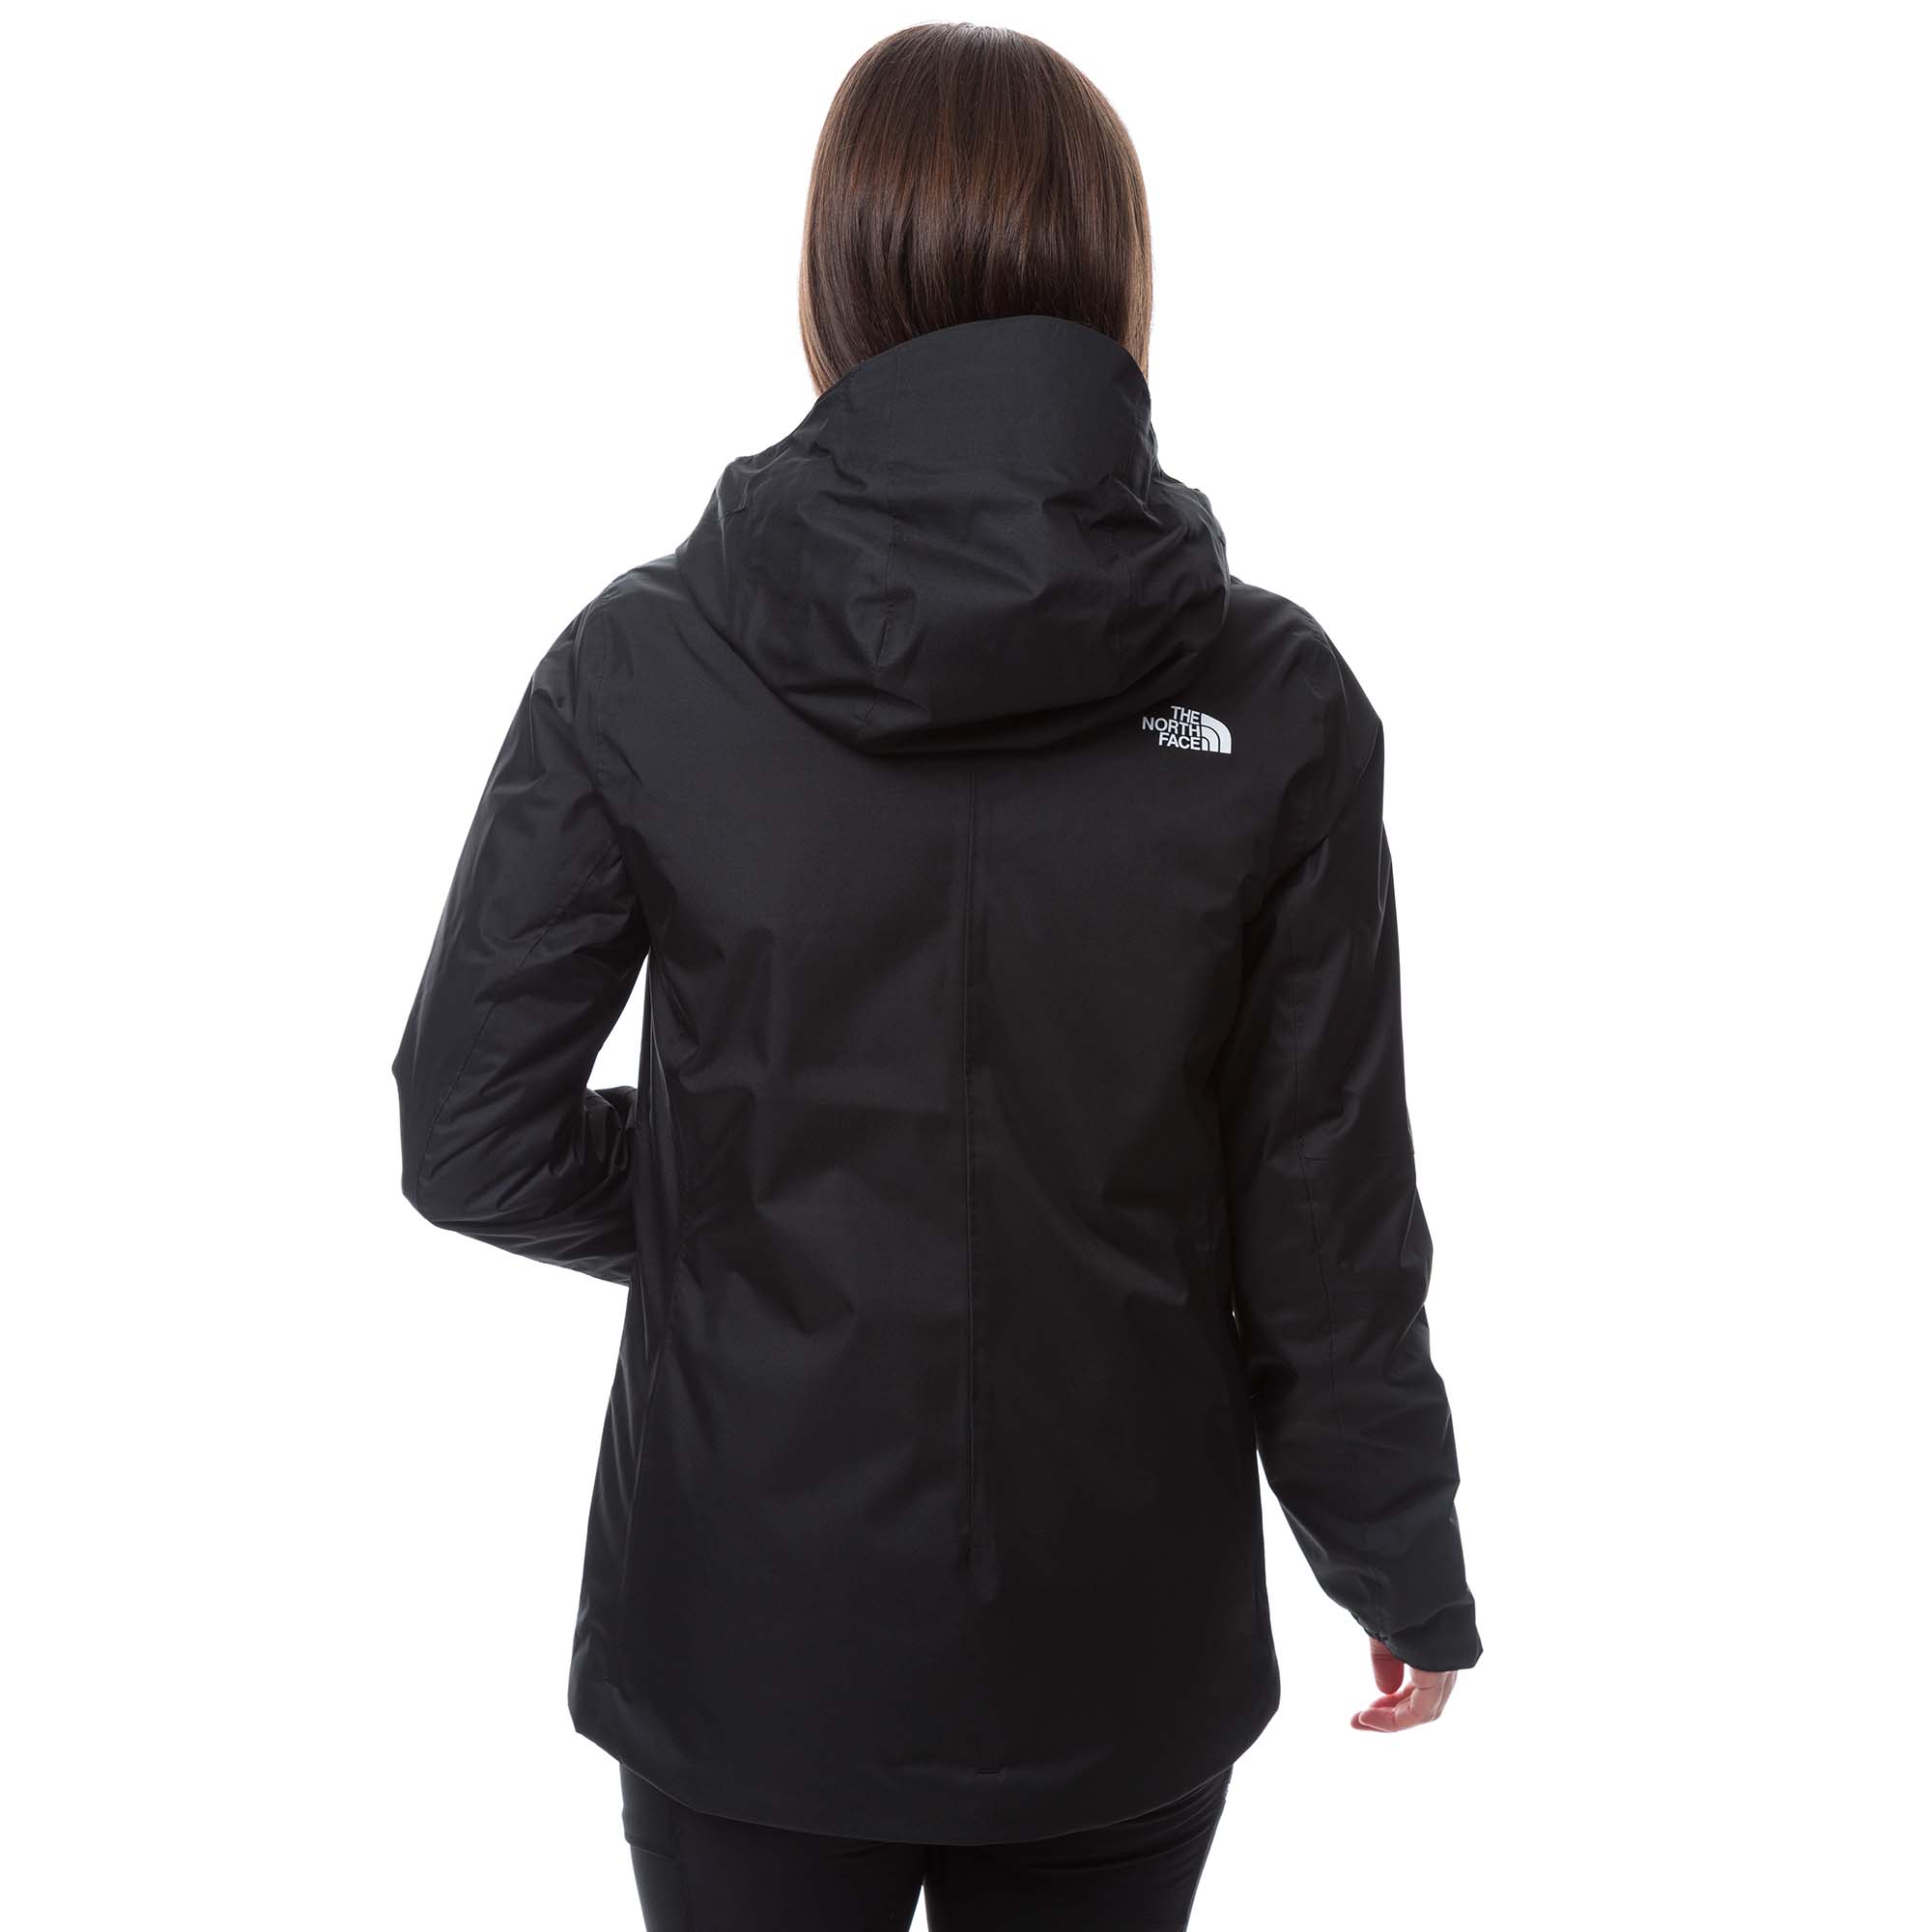 The North Face Quest Women's Insulated Jacket